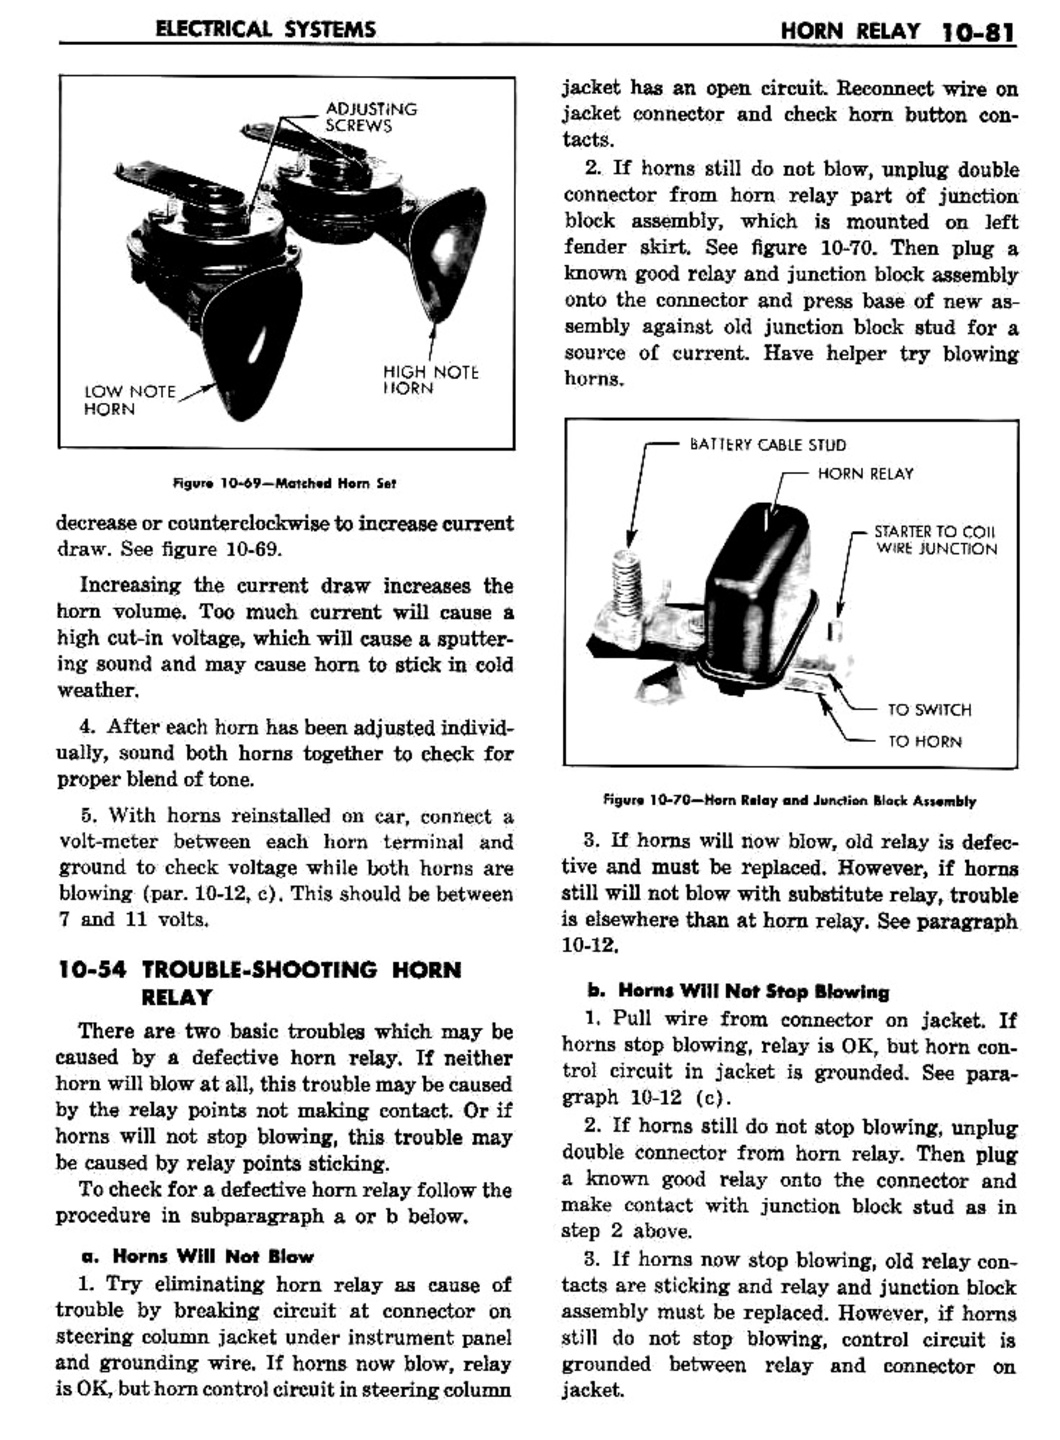 n_11 1960 Buick Shop Manual - Electrical Systems-081-081.jpg